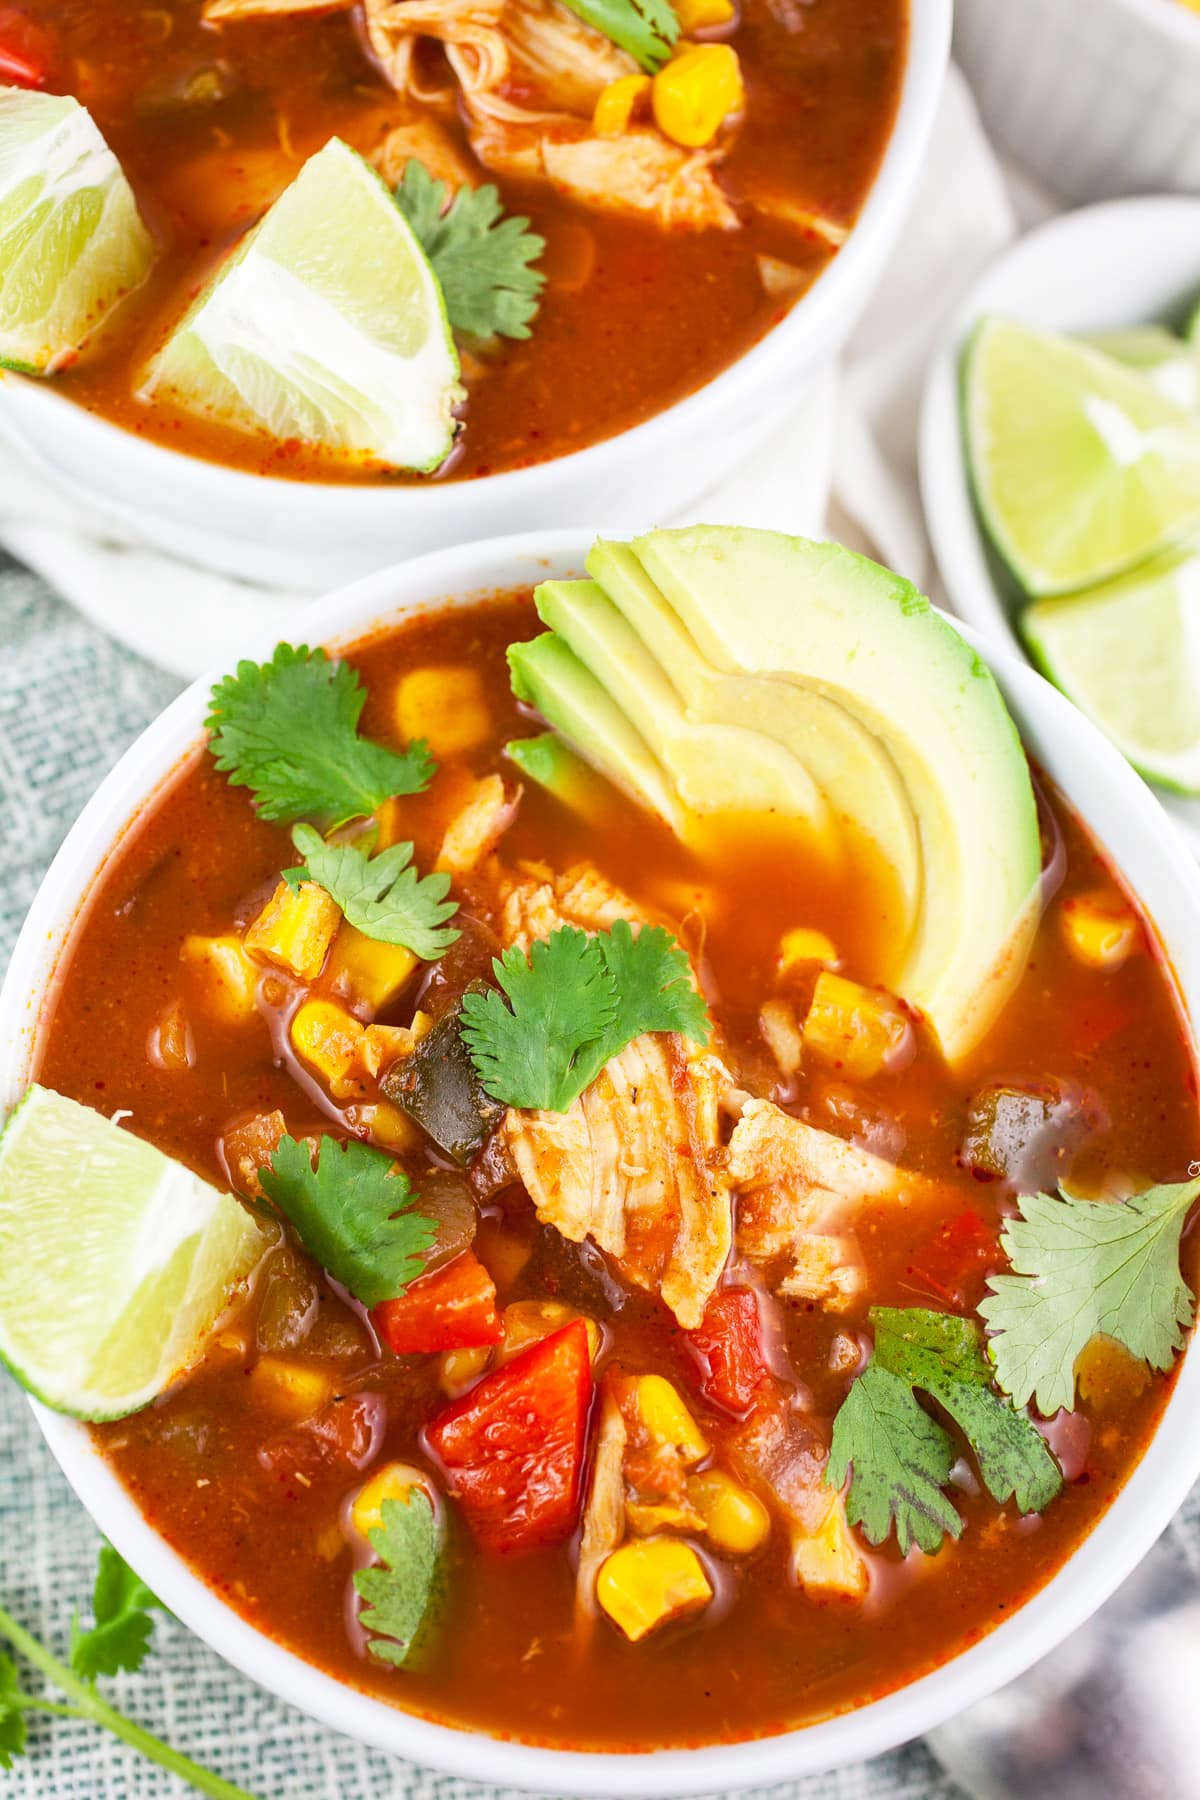 Southwest chicken corn soup in white bowls with sliced avocado, cilantro, and lime wedges.